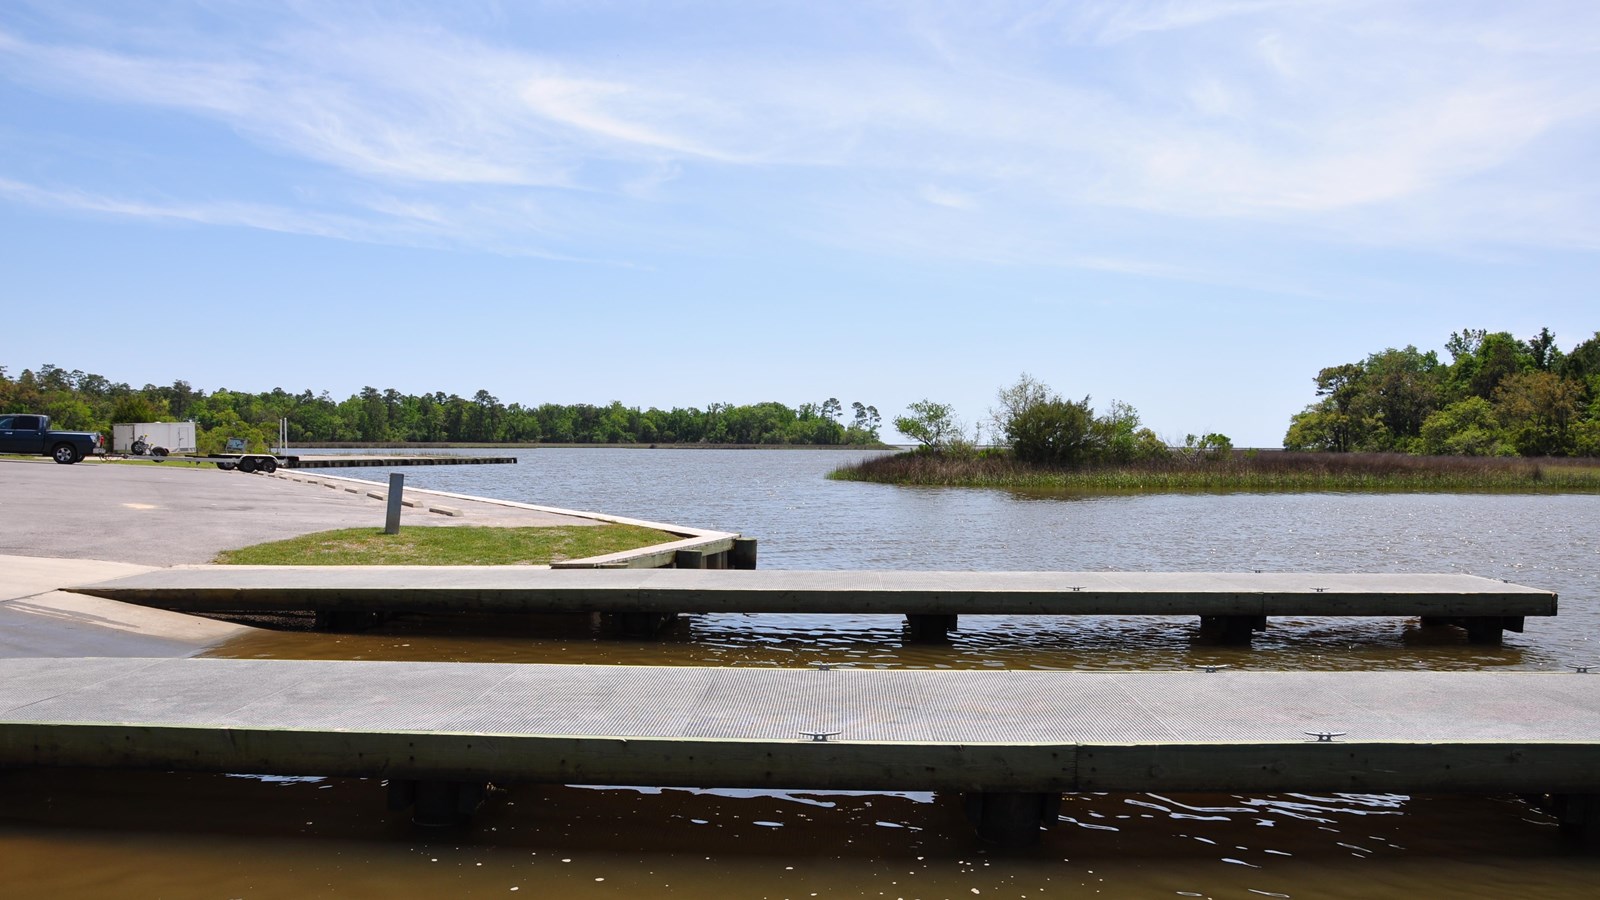 Two wooden docks stand in front of a pavement ramp overlooking the bayou.